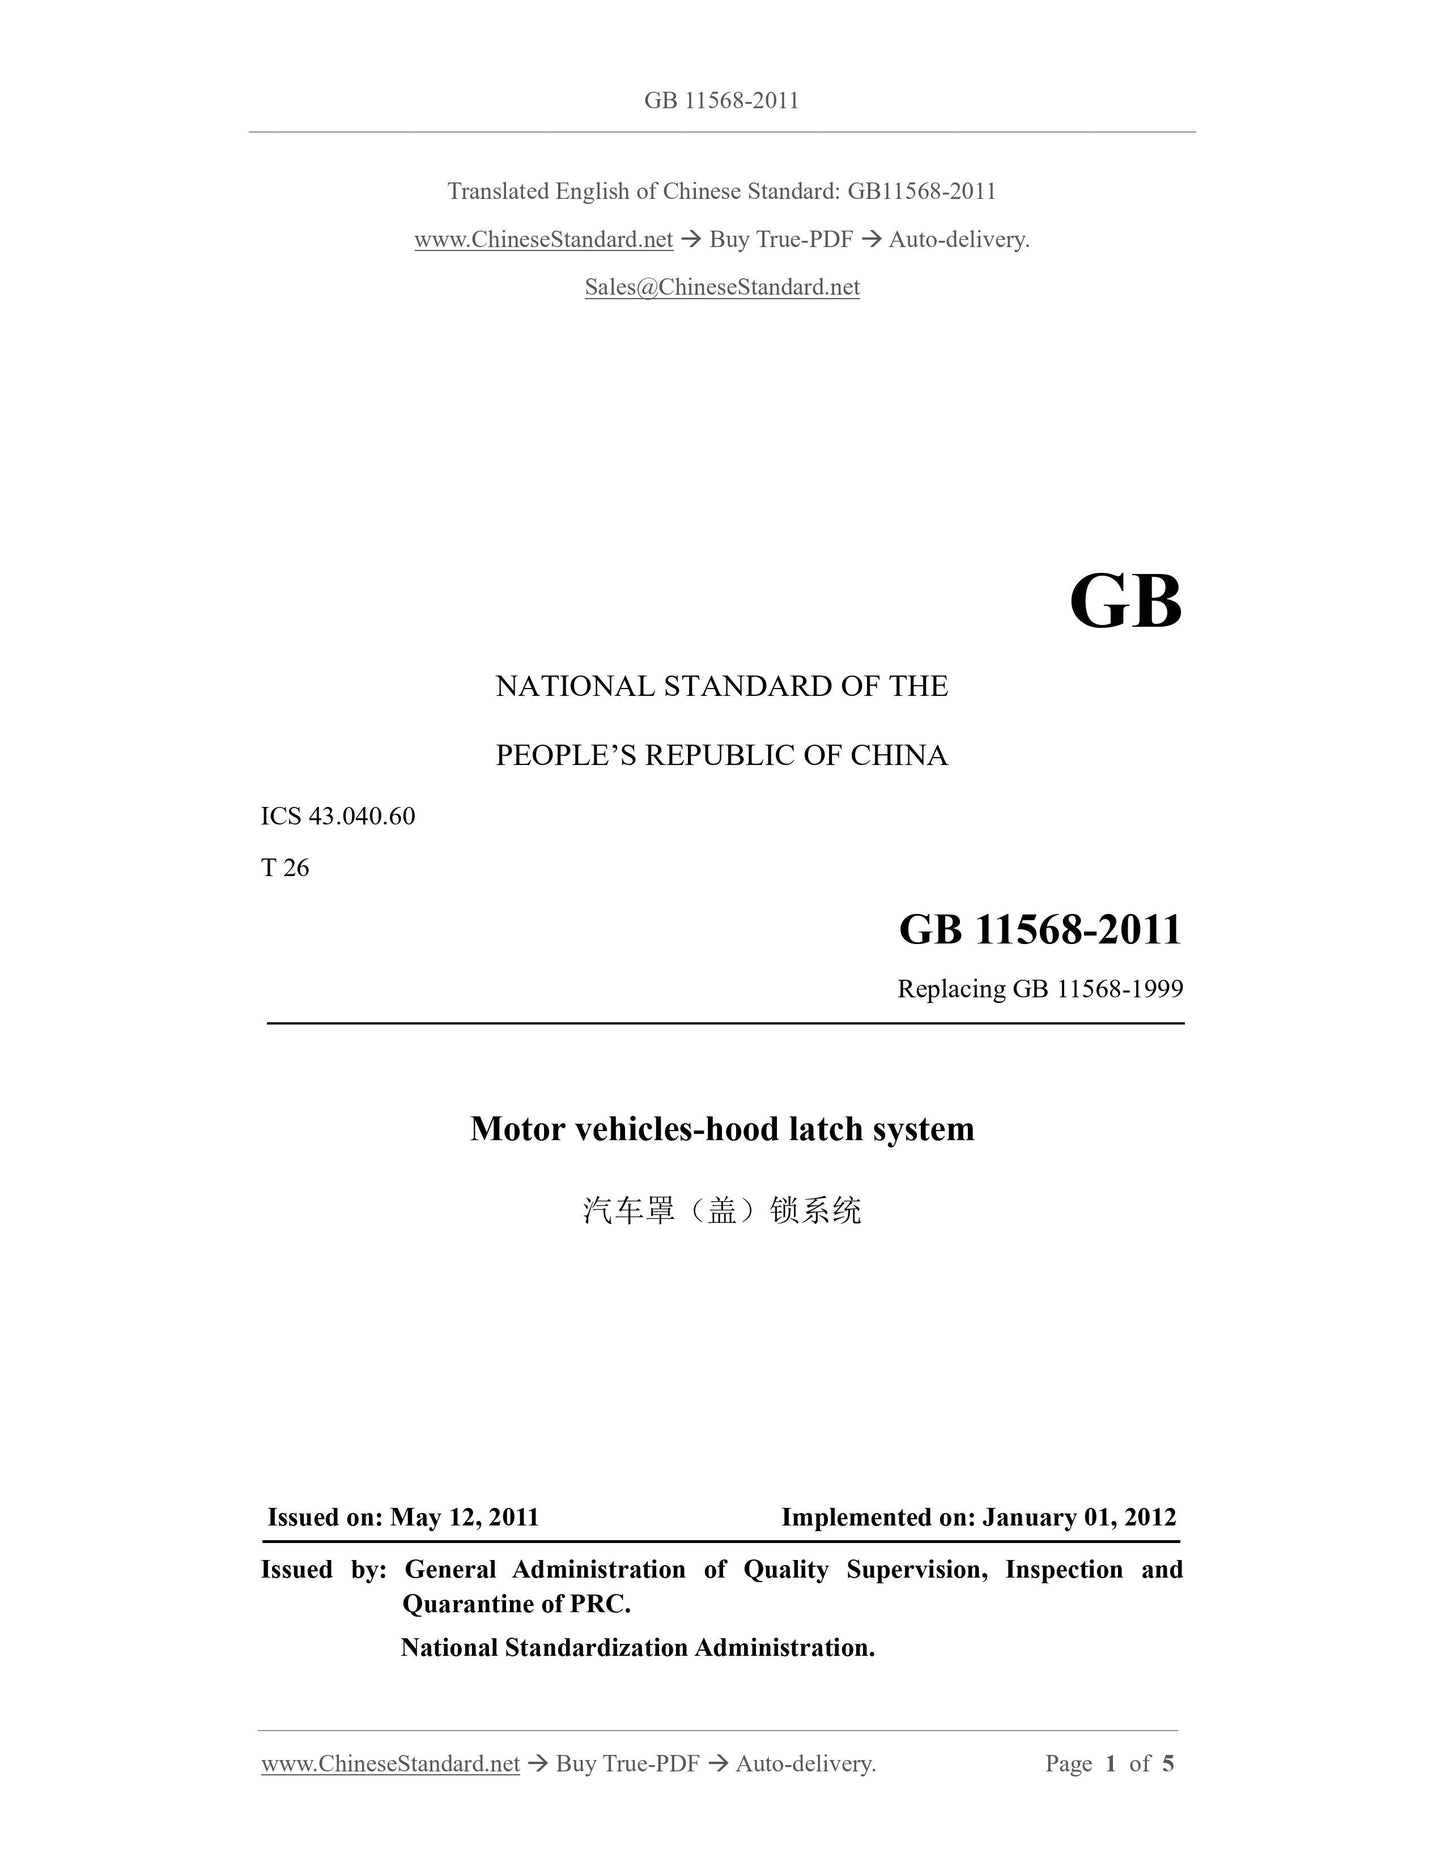 GB 11568-2011 Page 1